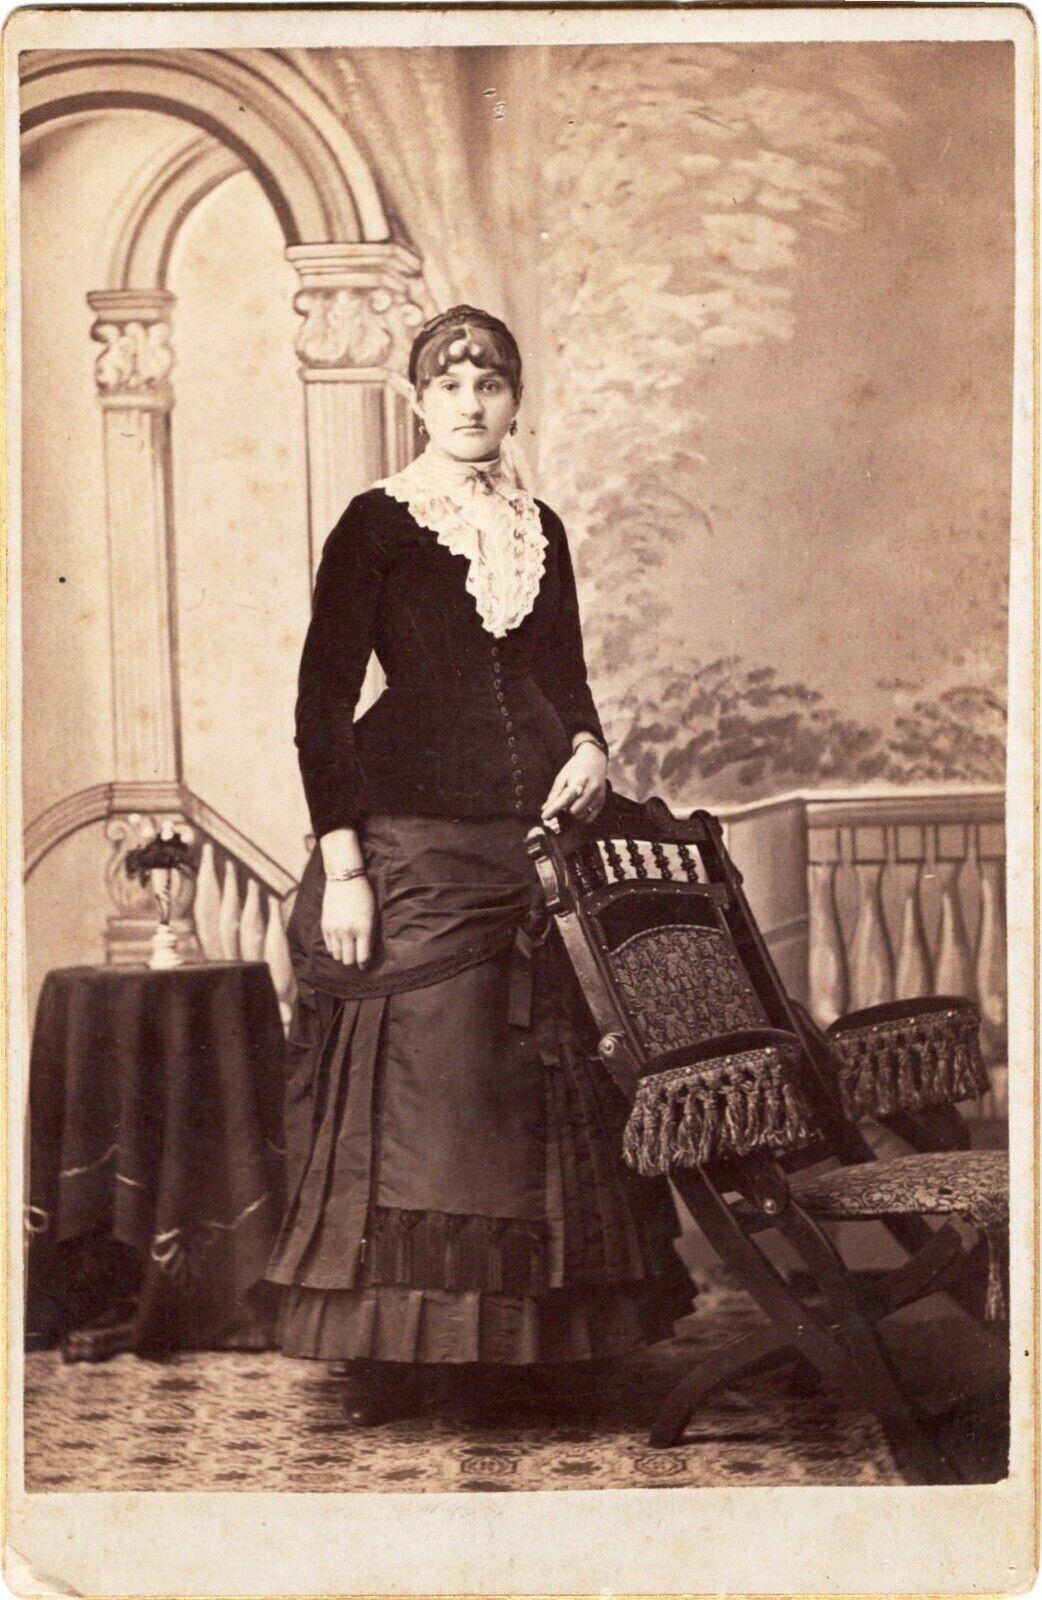 FASHIONABLE PRETTY YOUNG WOMAN : BEAUTIFUL OLD CHAIR : CABINET CARD PHOTOGRAPH